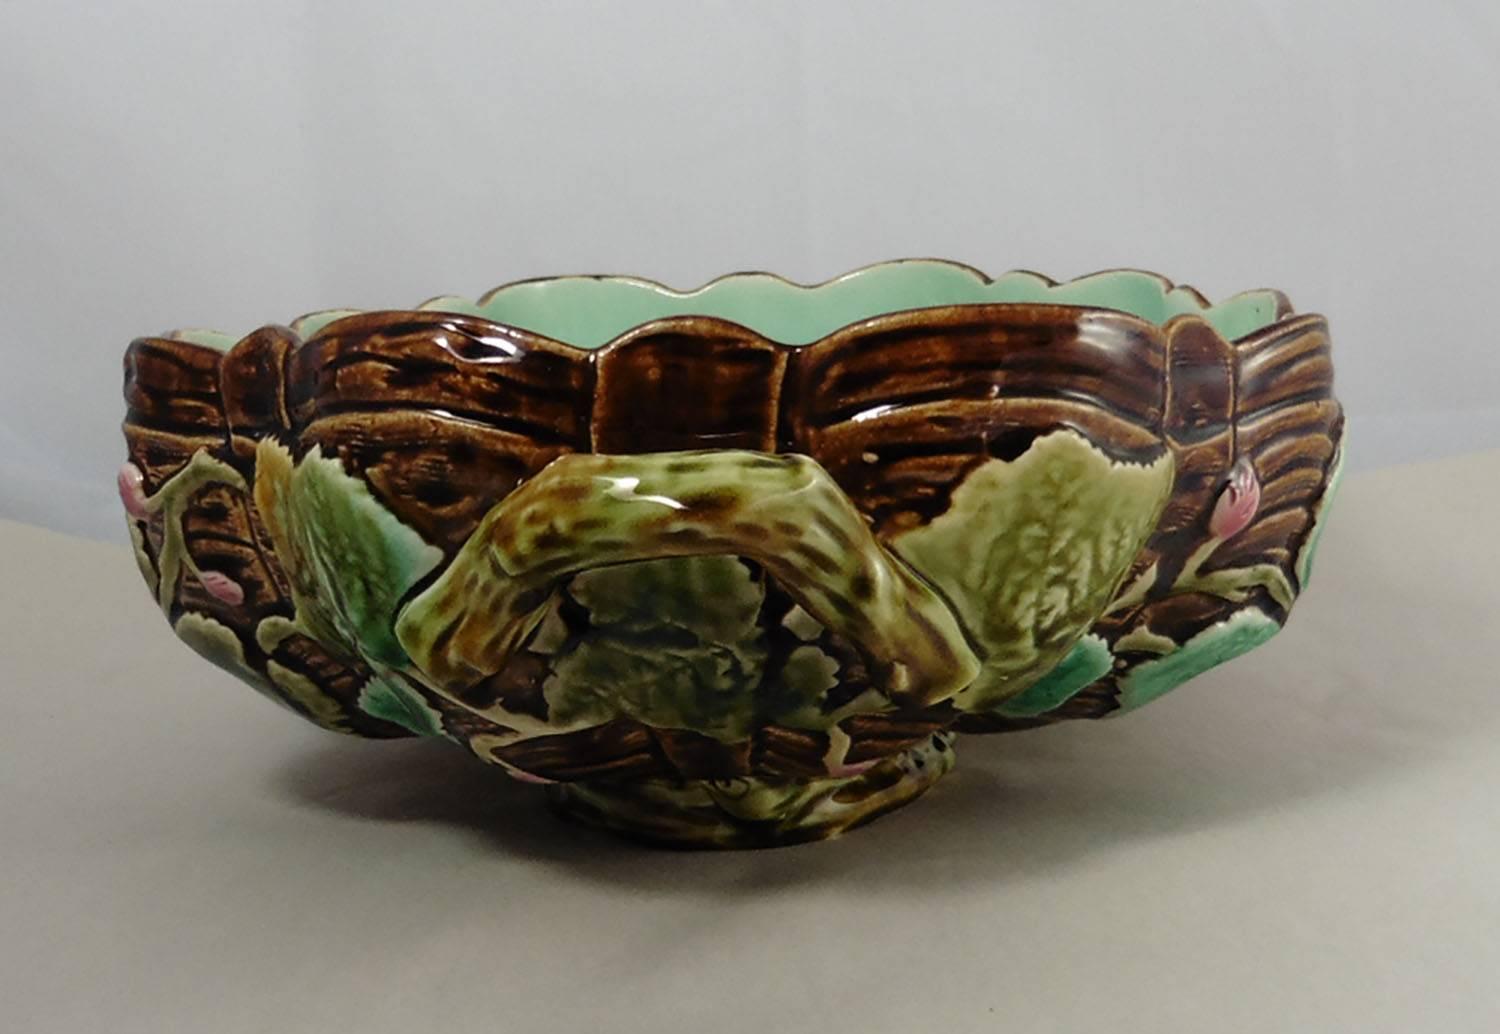 19th large French Majolica pumpkin leaves and flowers handled centerpiece jardiniere signed Choisy le Roi.